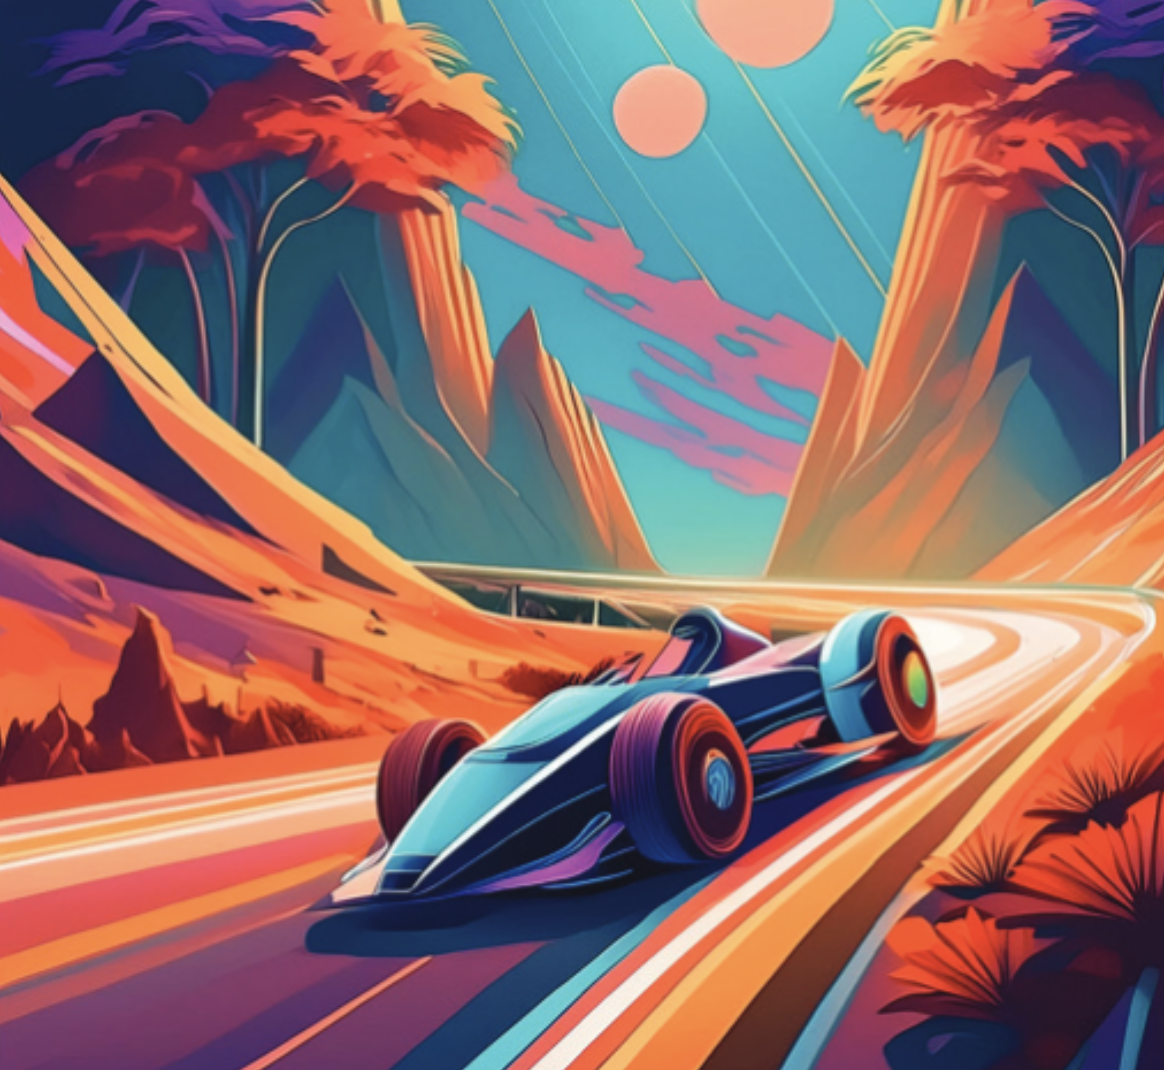 Songs to Beat the Arcade Racing Game High Score To